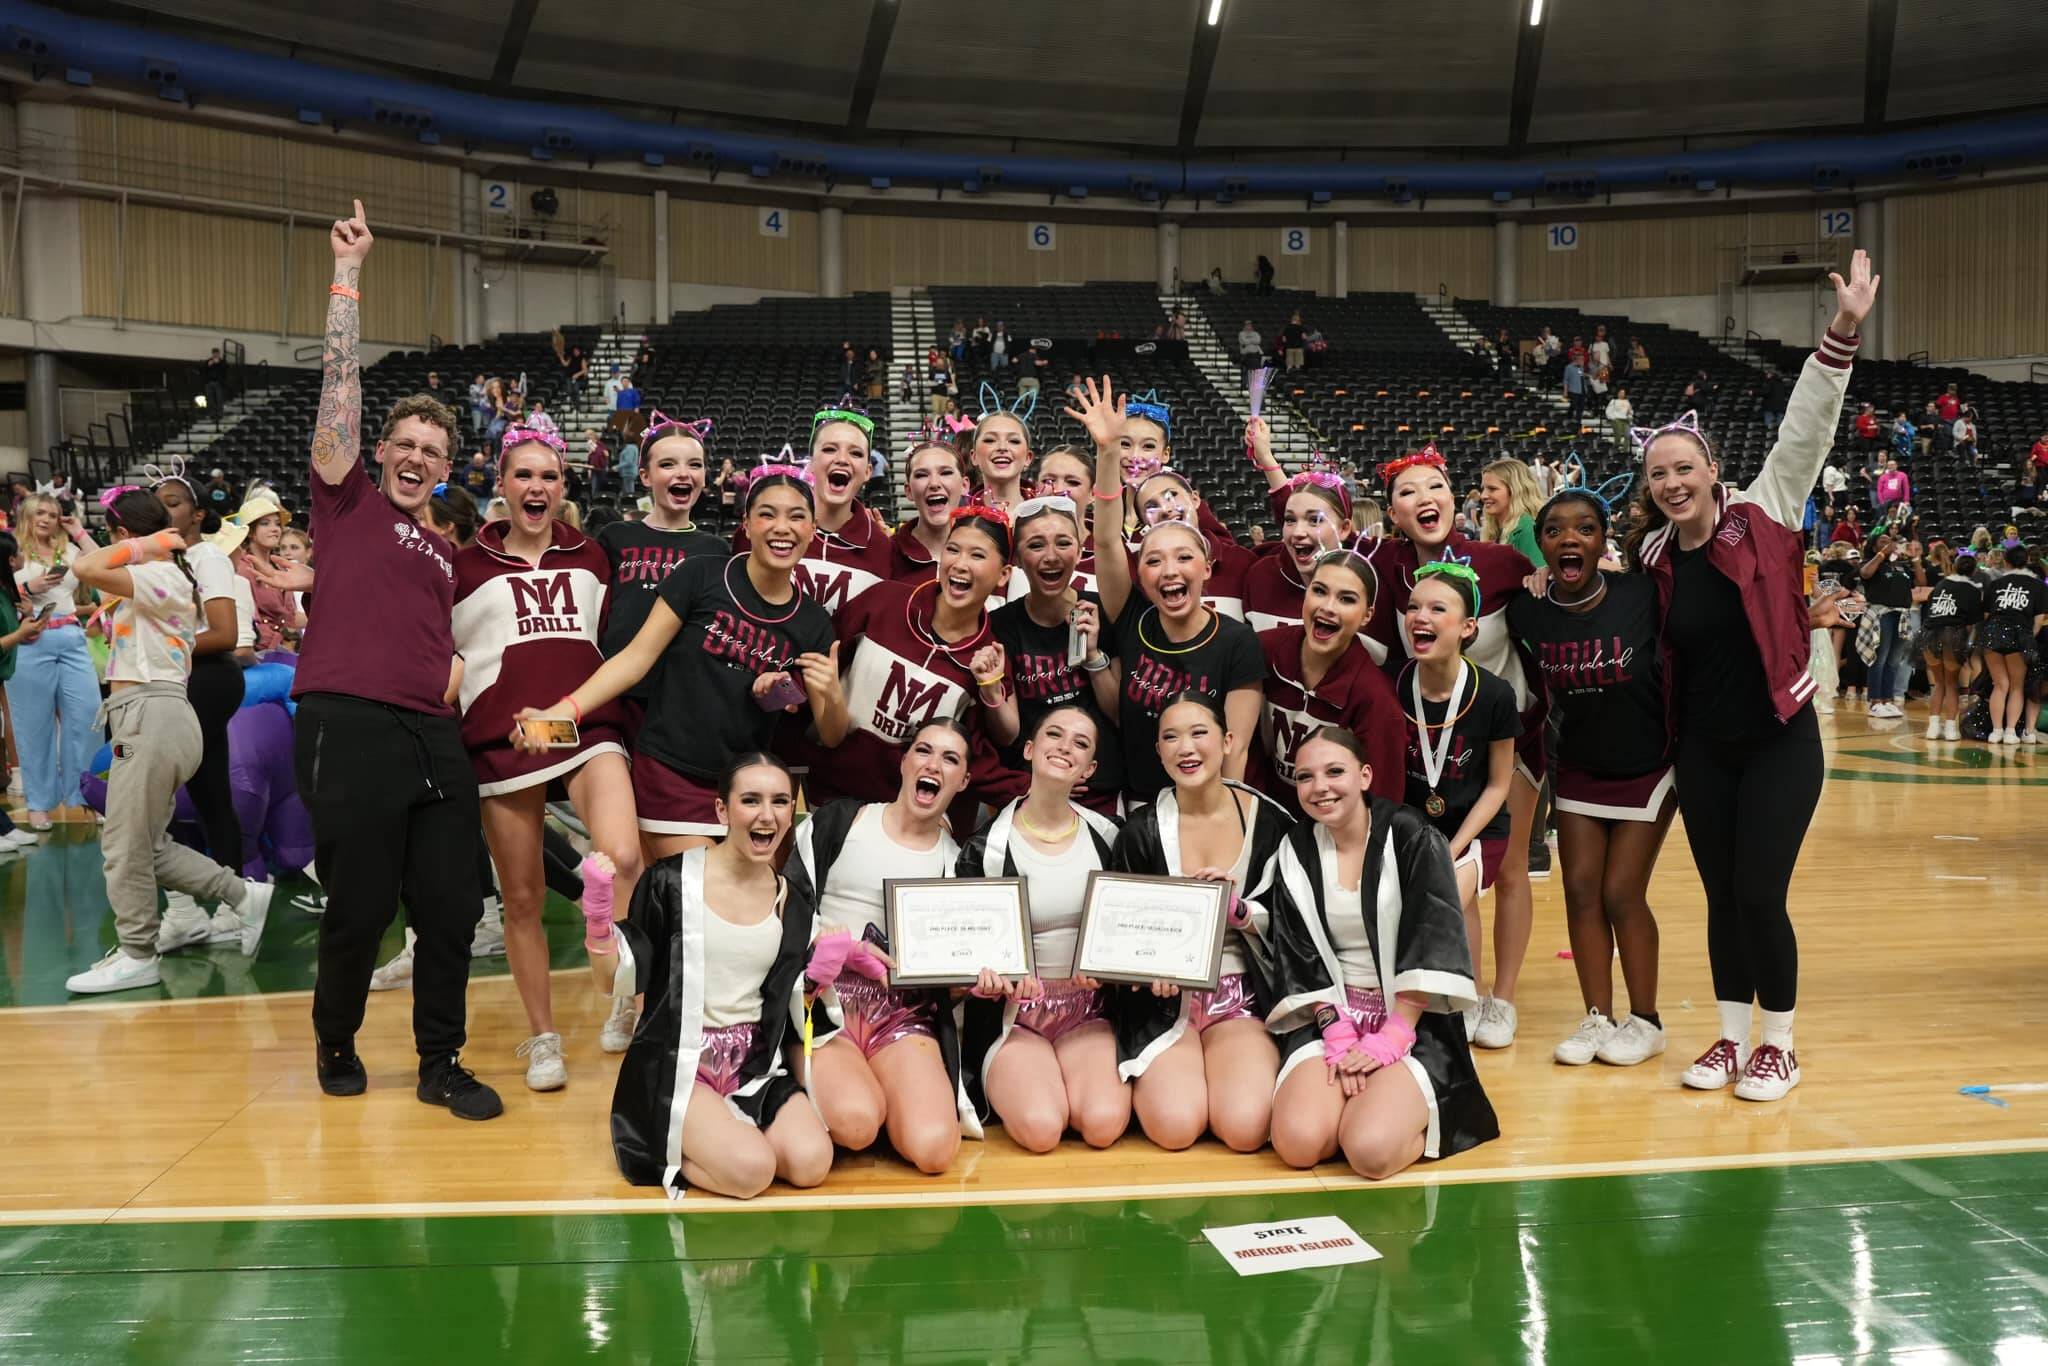 Mercer Island High School’s drill team excelled with a pair of second-place finishes at the recent dance/drill state championships at the Yakima Valley SunDome. On March 23 in the 1A/2A/3A state event, the locals notched second in the 3A military competition (273.00 points) and were runner-up in the 1A/2A/3A kick category (266.90). Individually, freshman driller Bella Liang finished third in the drill down results. This is the drill team’s first runner-up placement in 18 years and its first time snagging runner-up placements in two categories simultaneously. The locals usually compete in military, and they jumped into the kick category for the first time this year. Photo courtesy of the Mercer Island School District